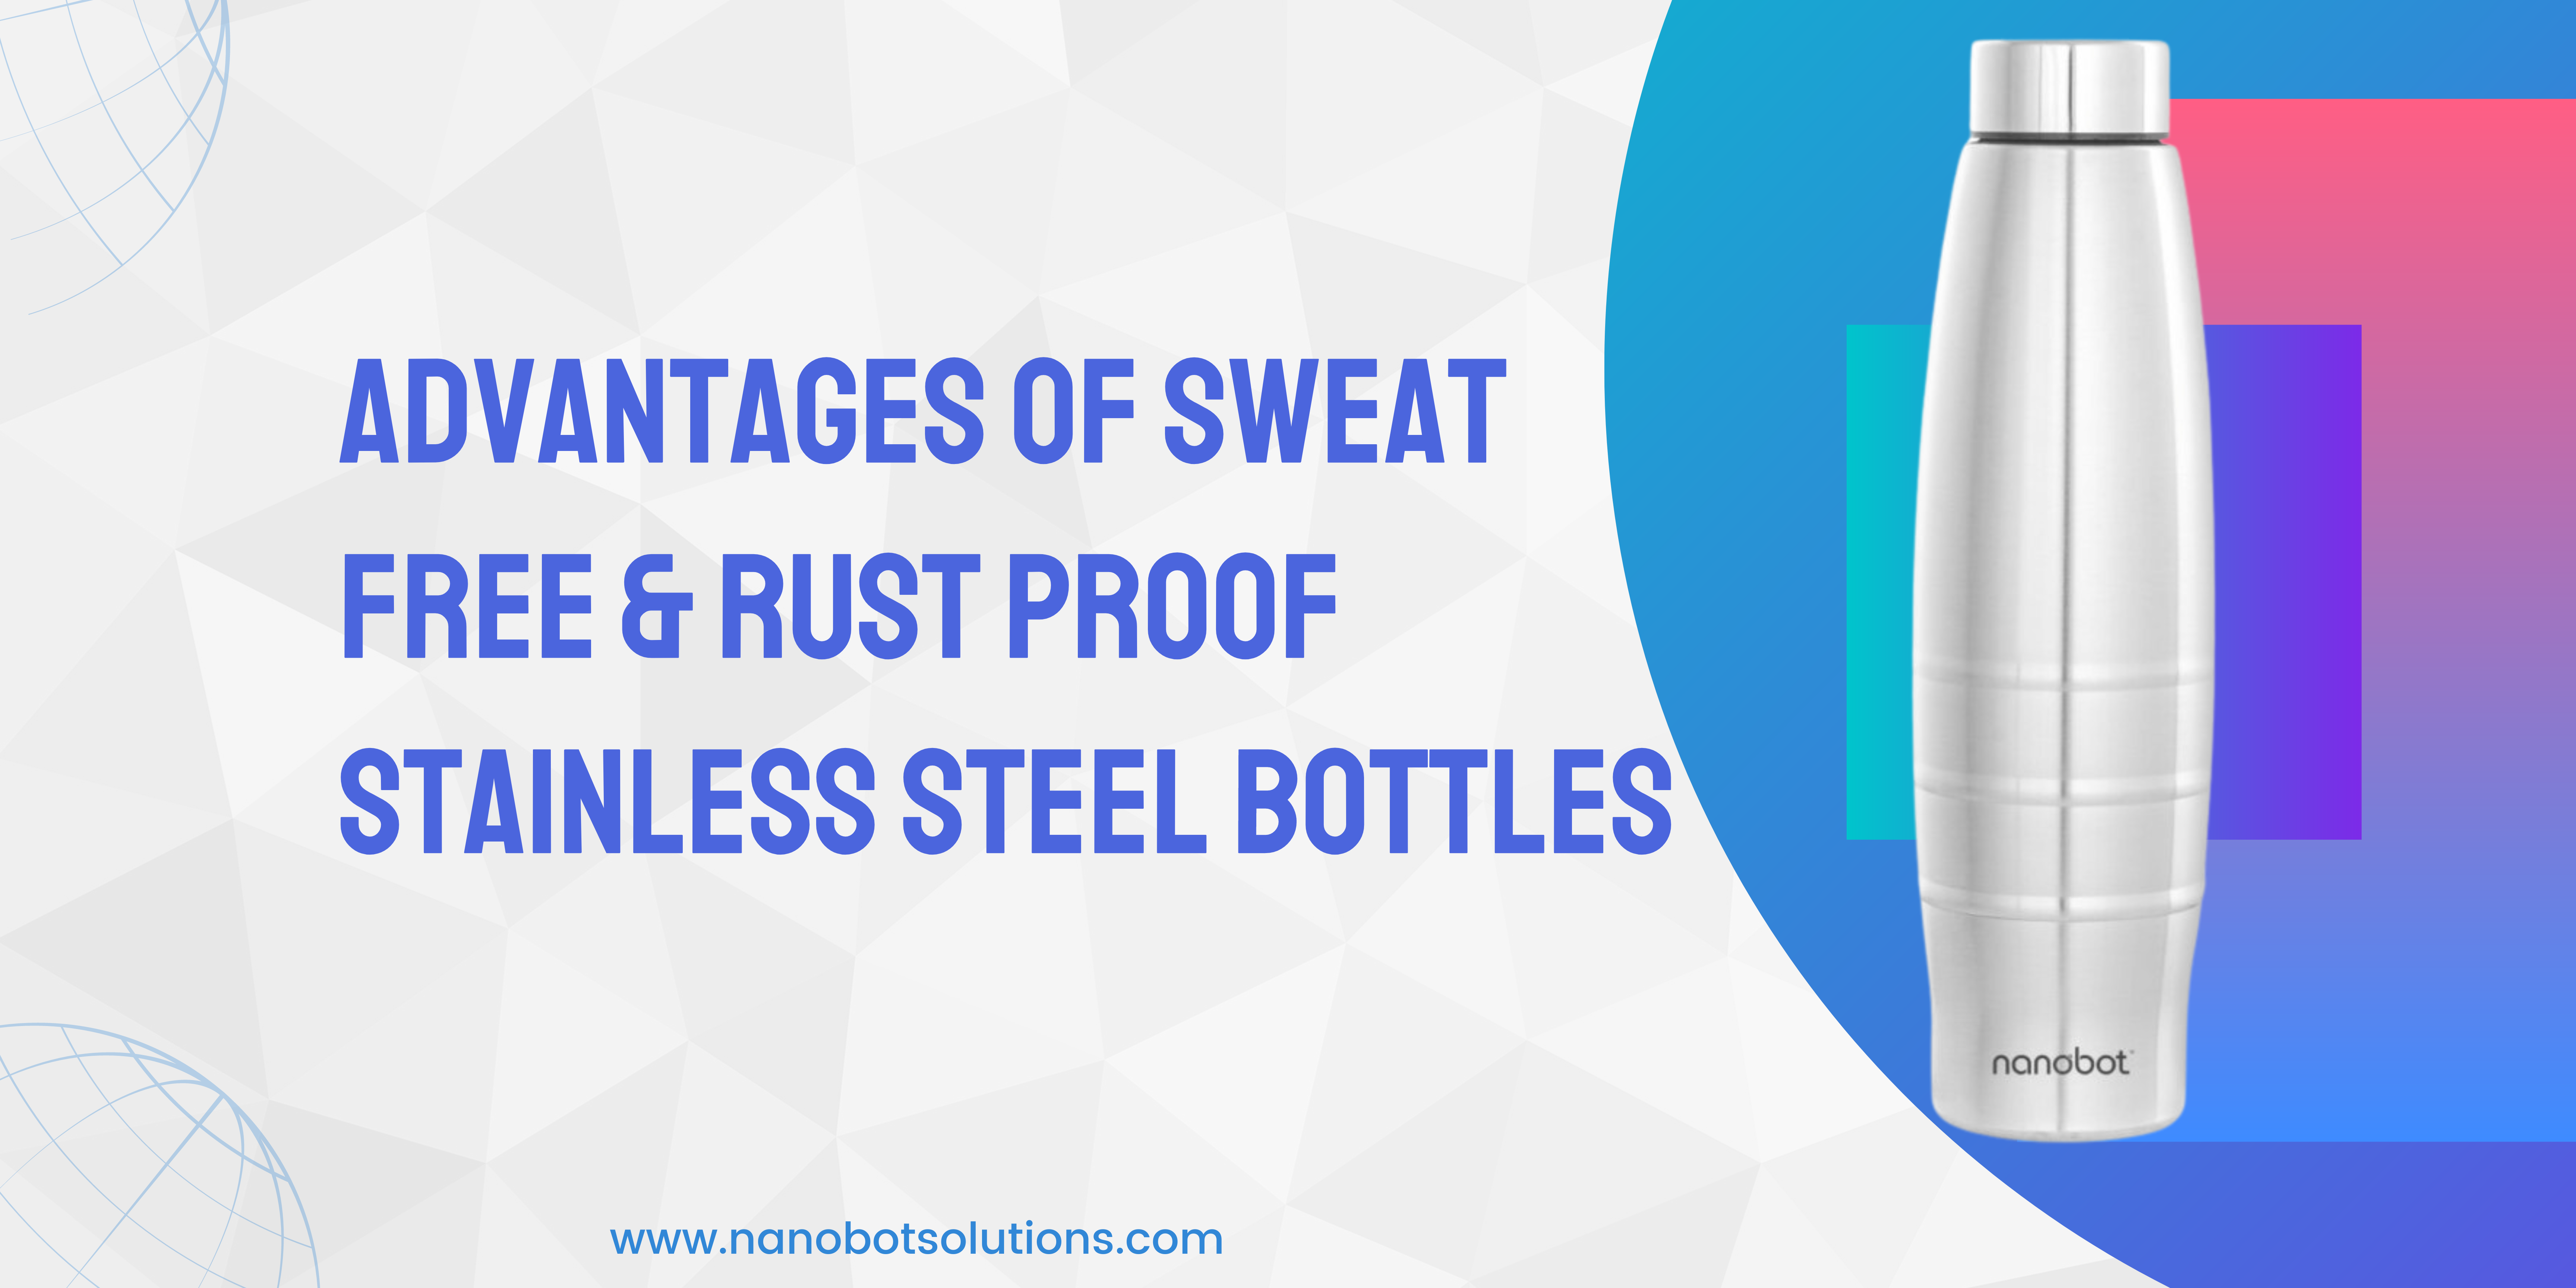 Advantages Of Sweat Free Rust Proof Stainless Steel Bottles 1 1 | Nanobot